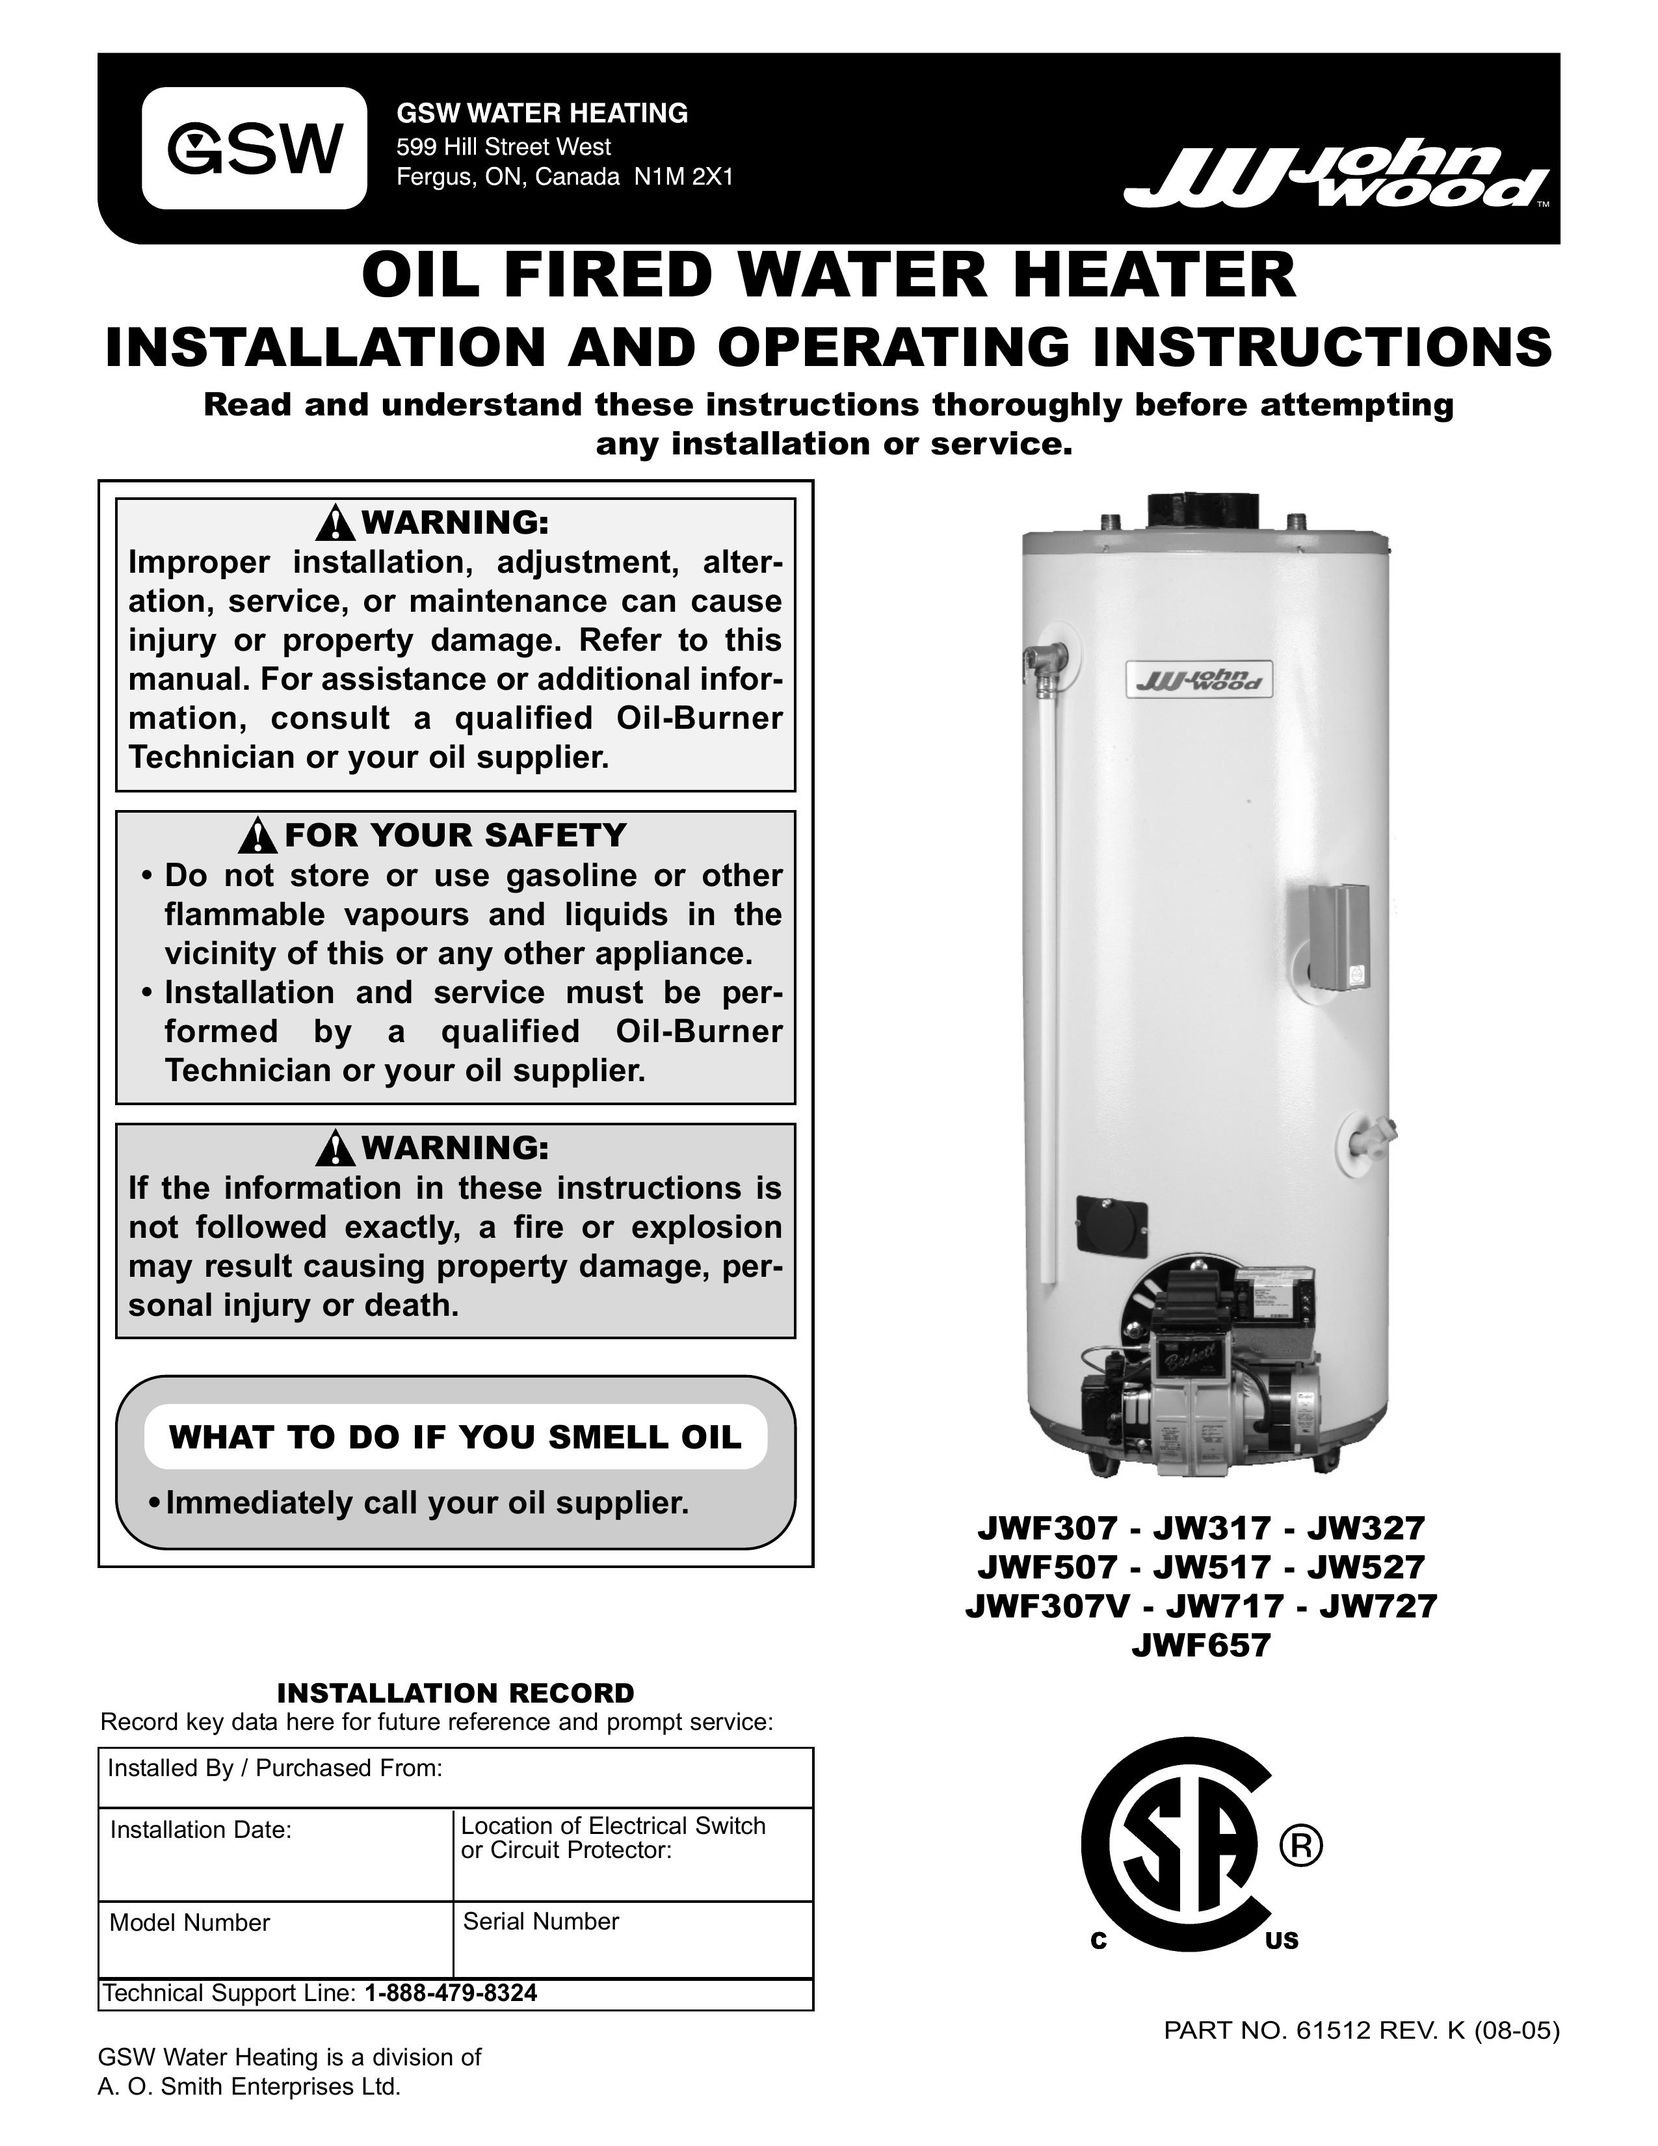 Smith Cast Iron Boilers JWF307V Water Heater User Manual